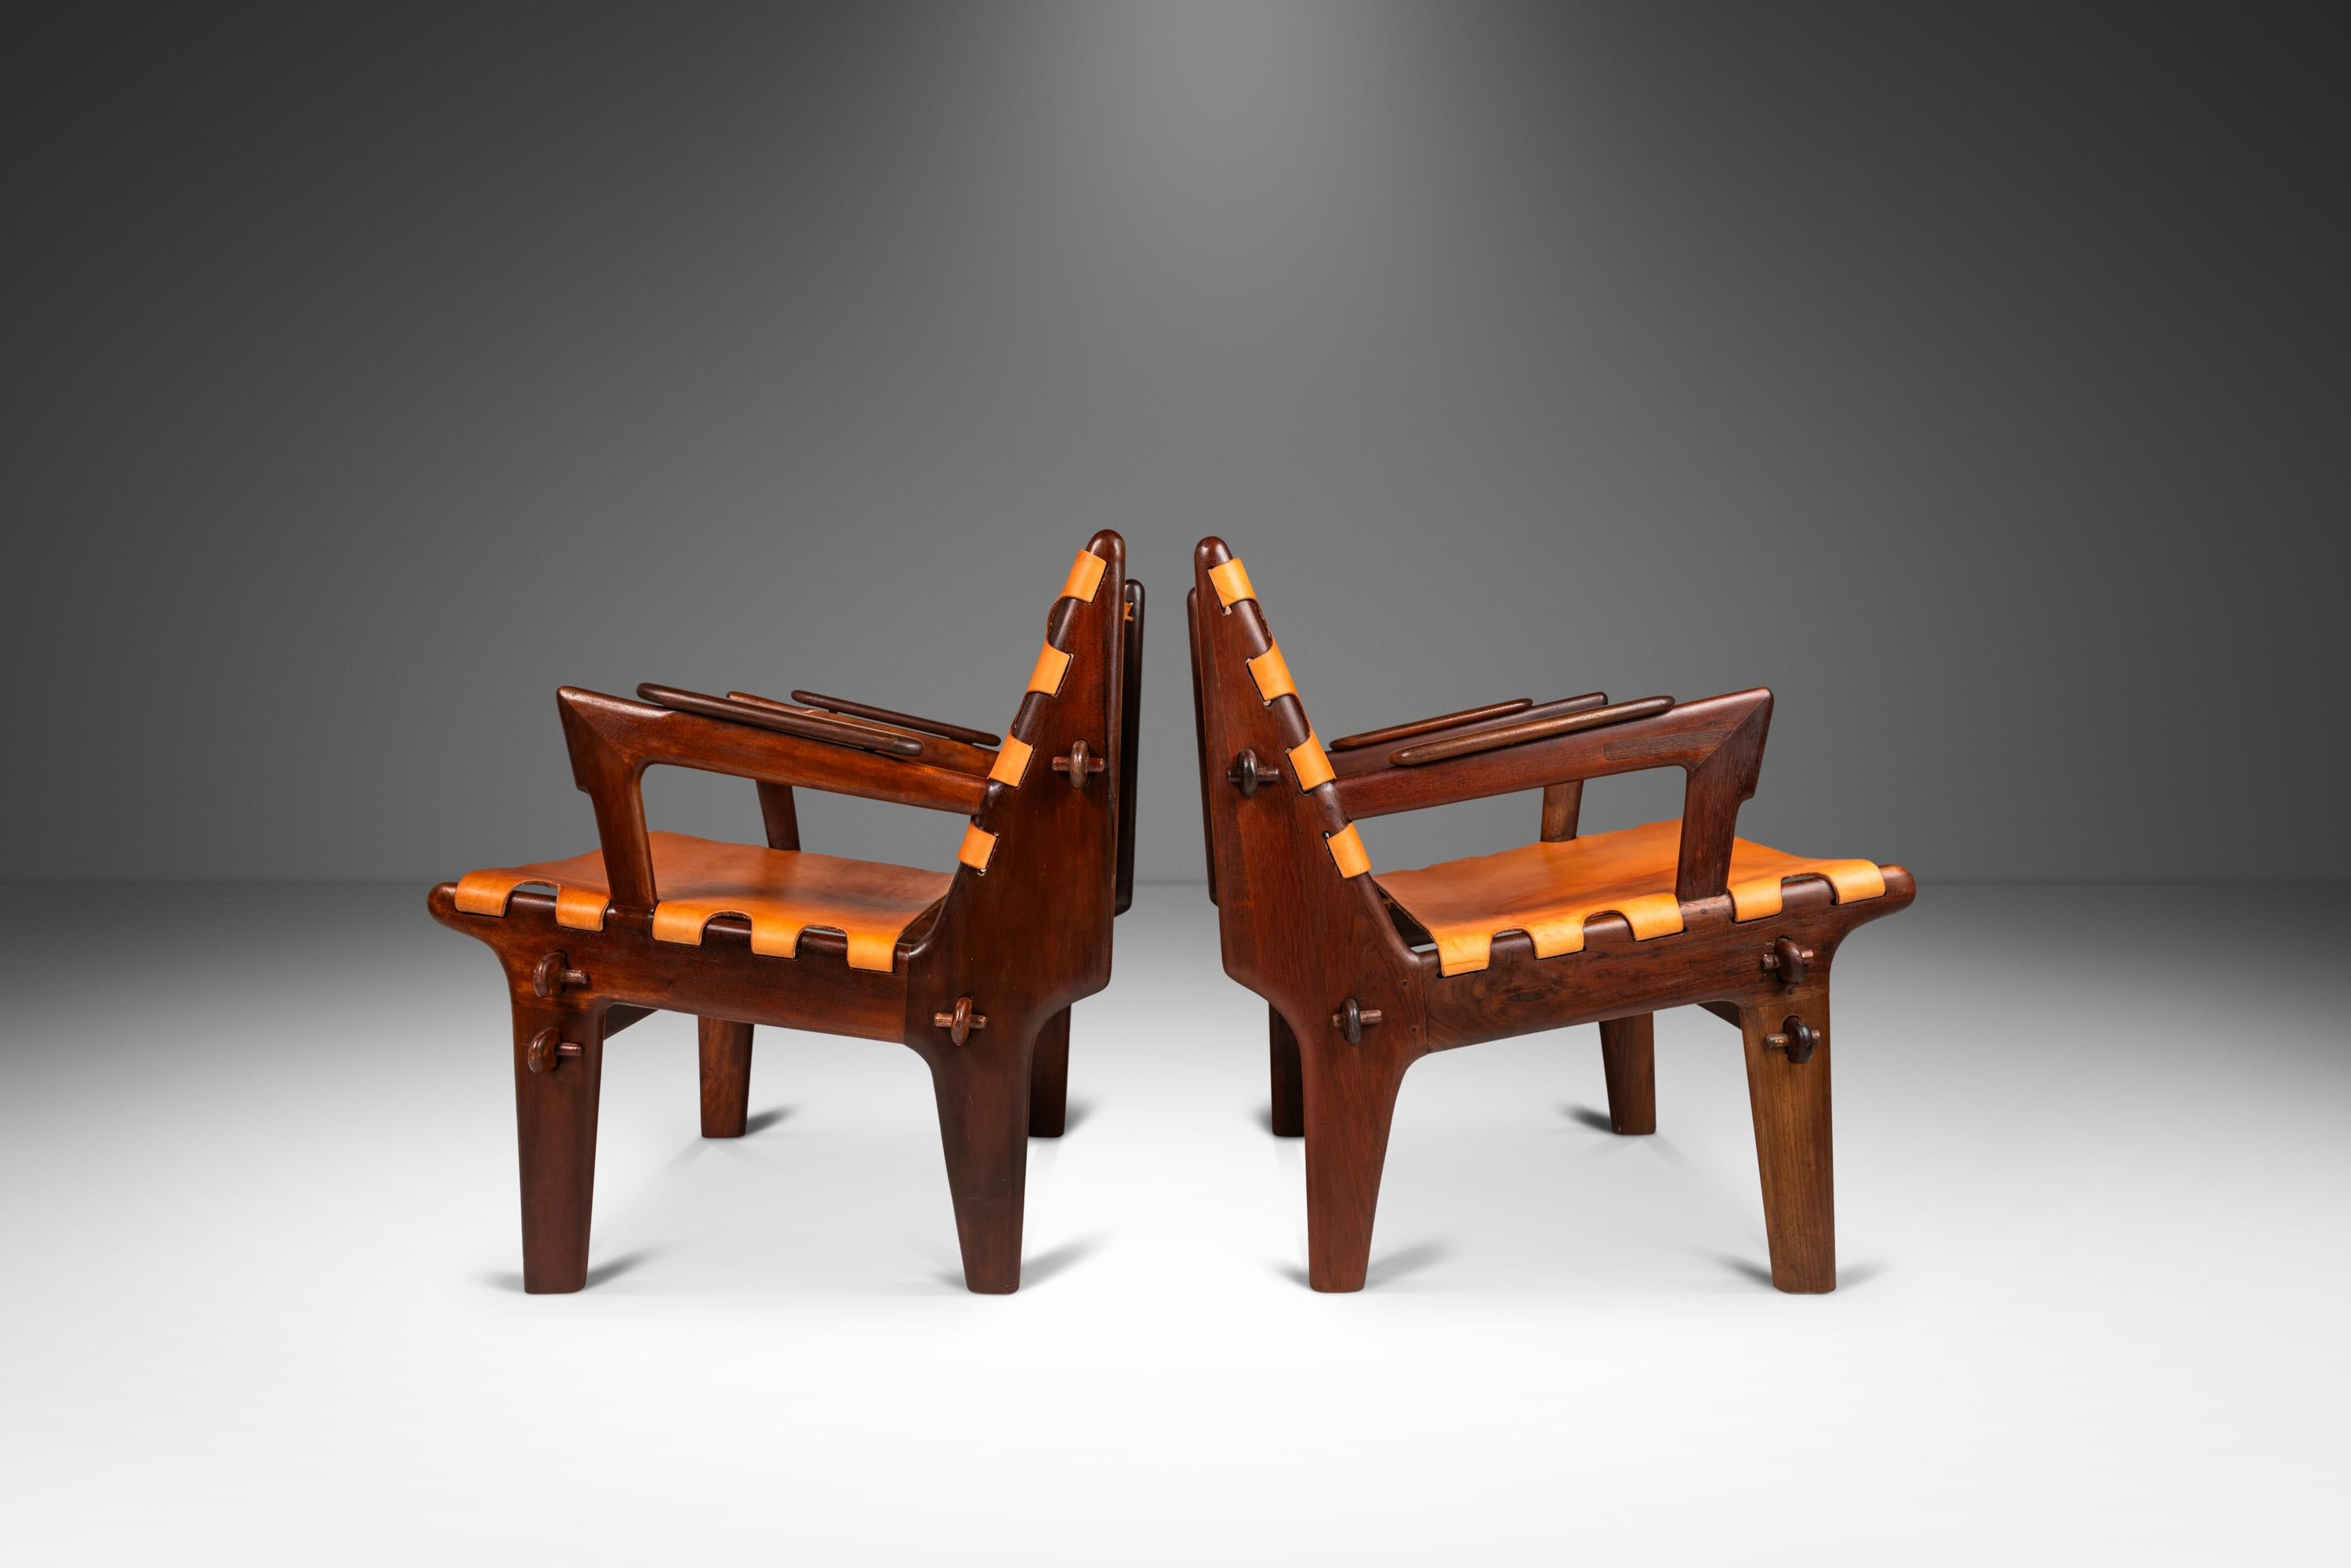 Set of 2 Tooled Leather Sling Lounge Chairs by Angel Pazmi, Ecuador, c. 1960's For Sale 1